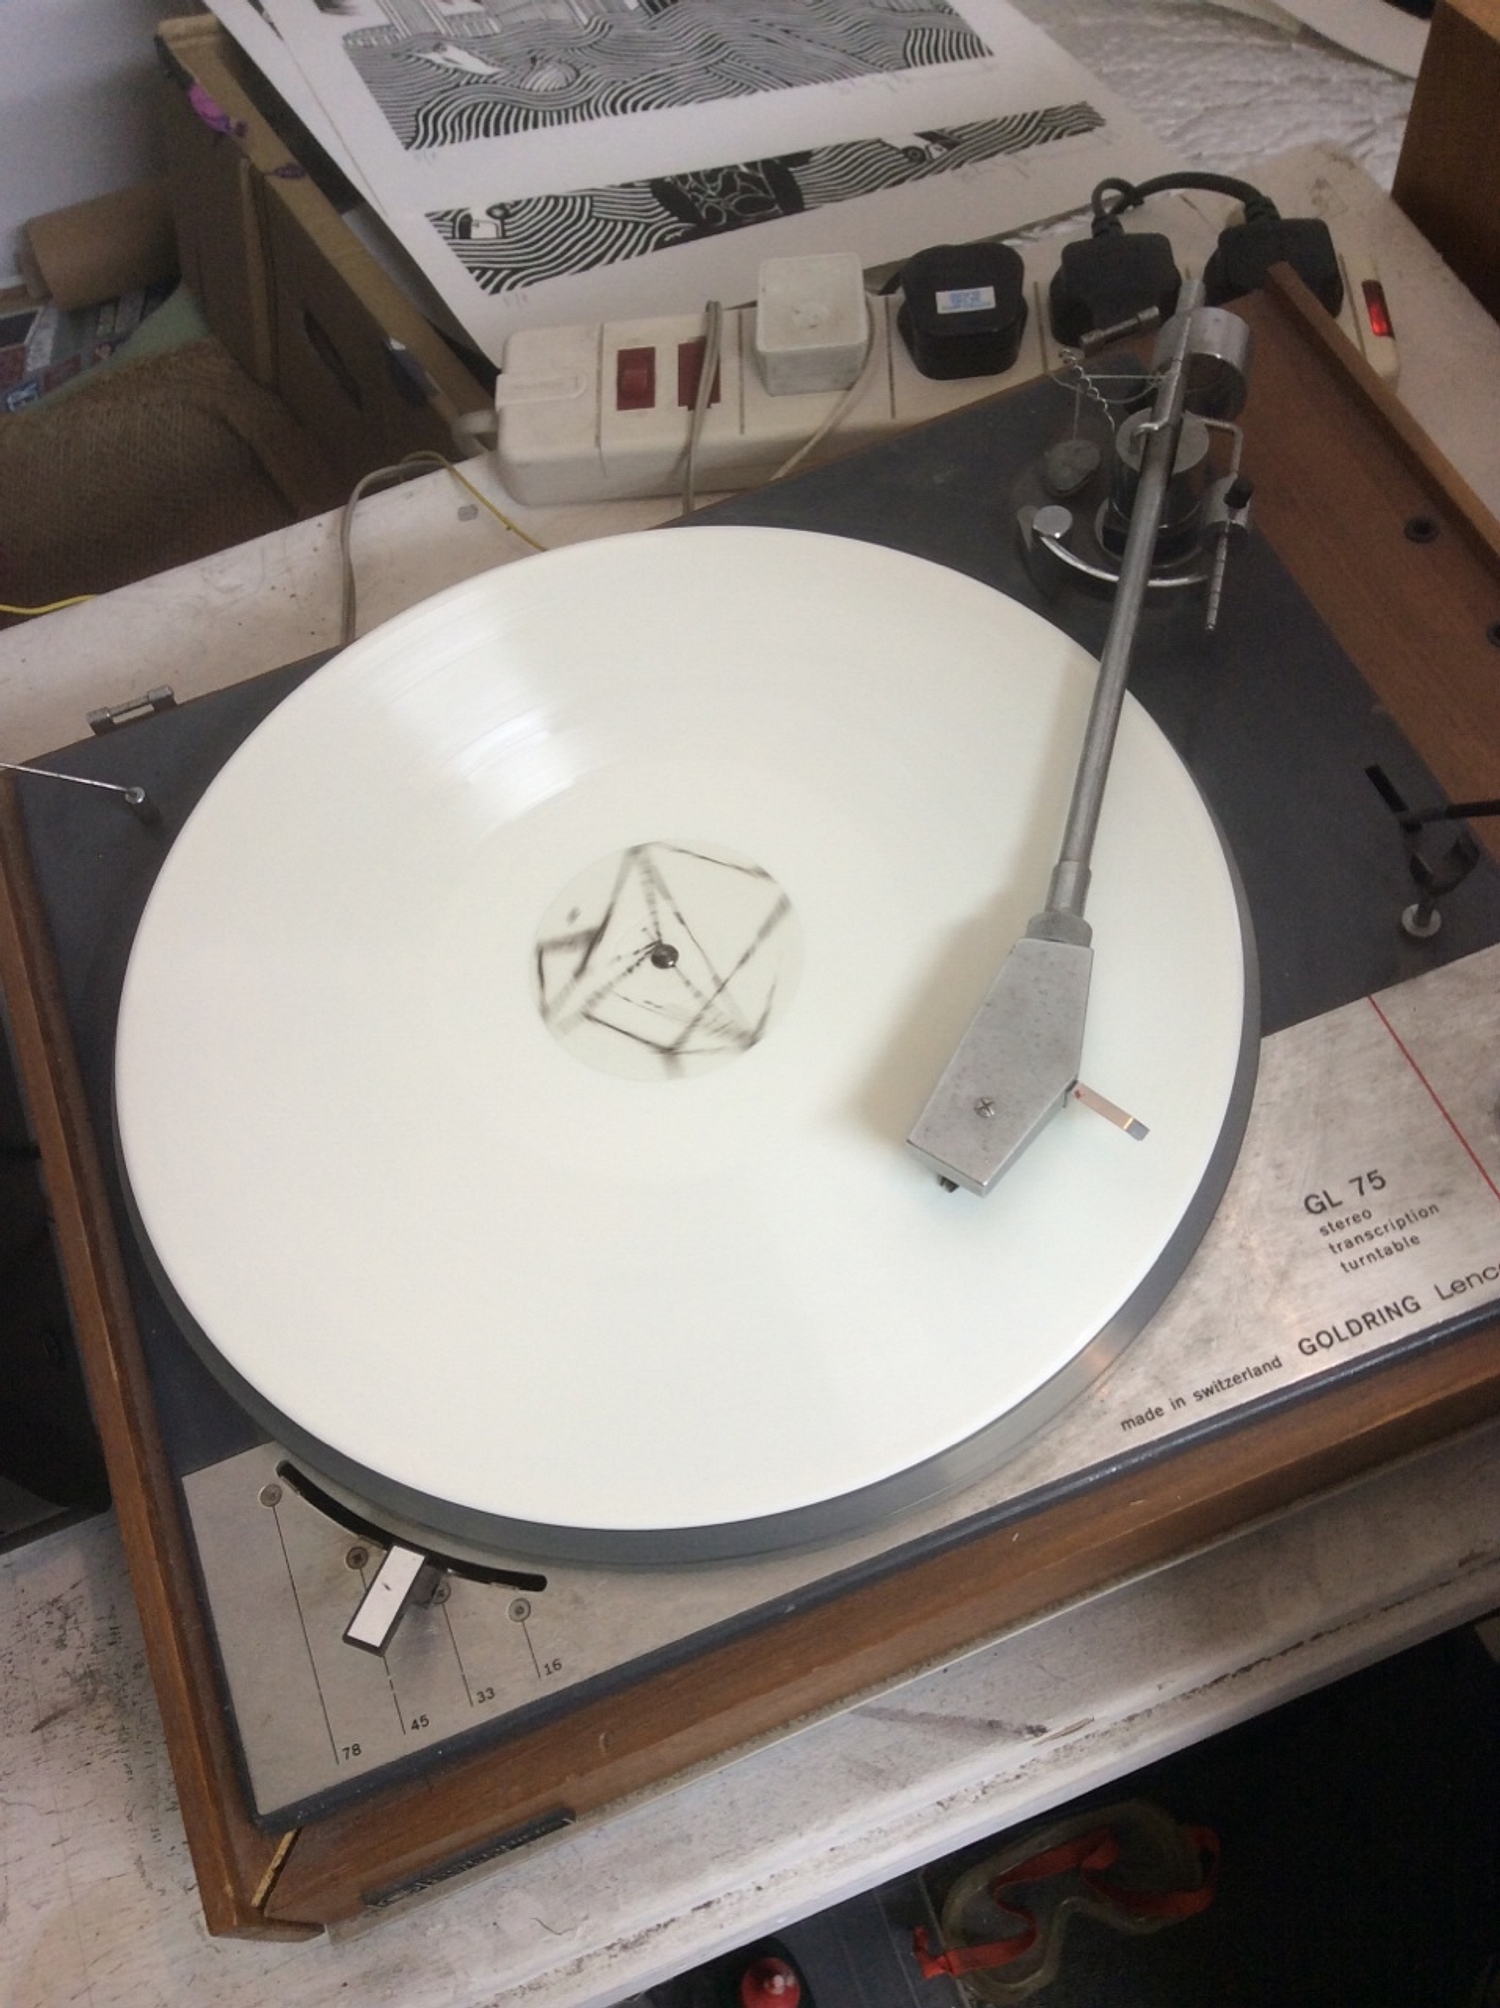 ​Thom Yorke posts vinyl picture, is definitely up to something